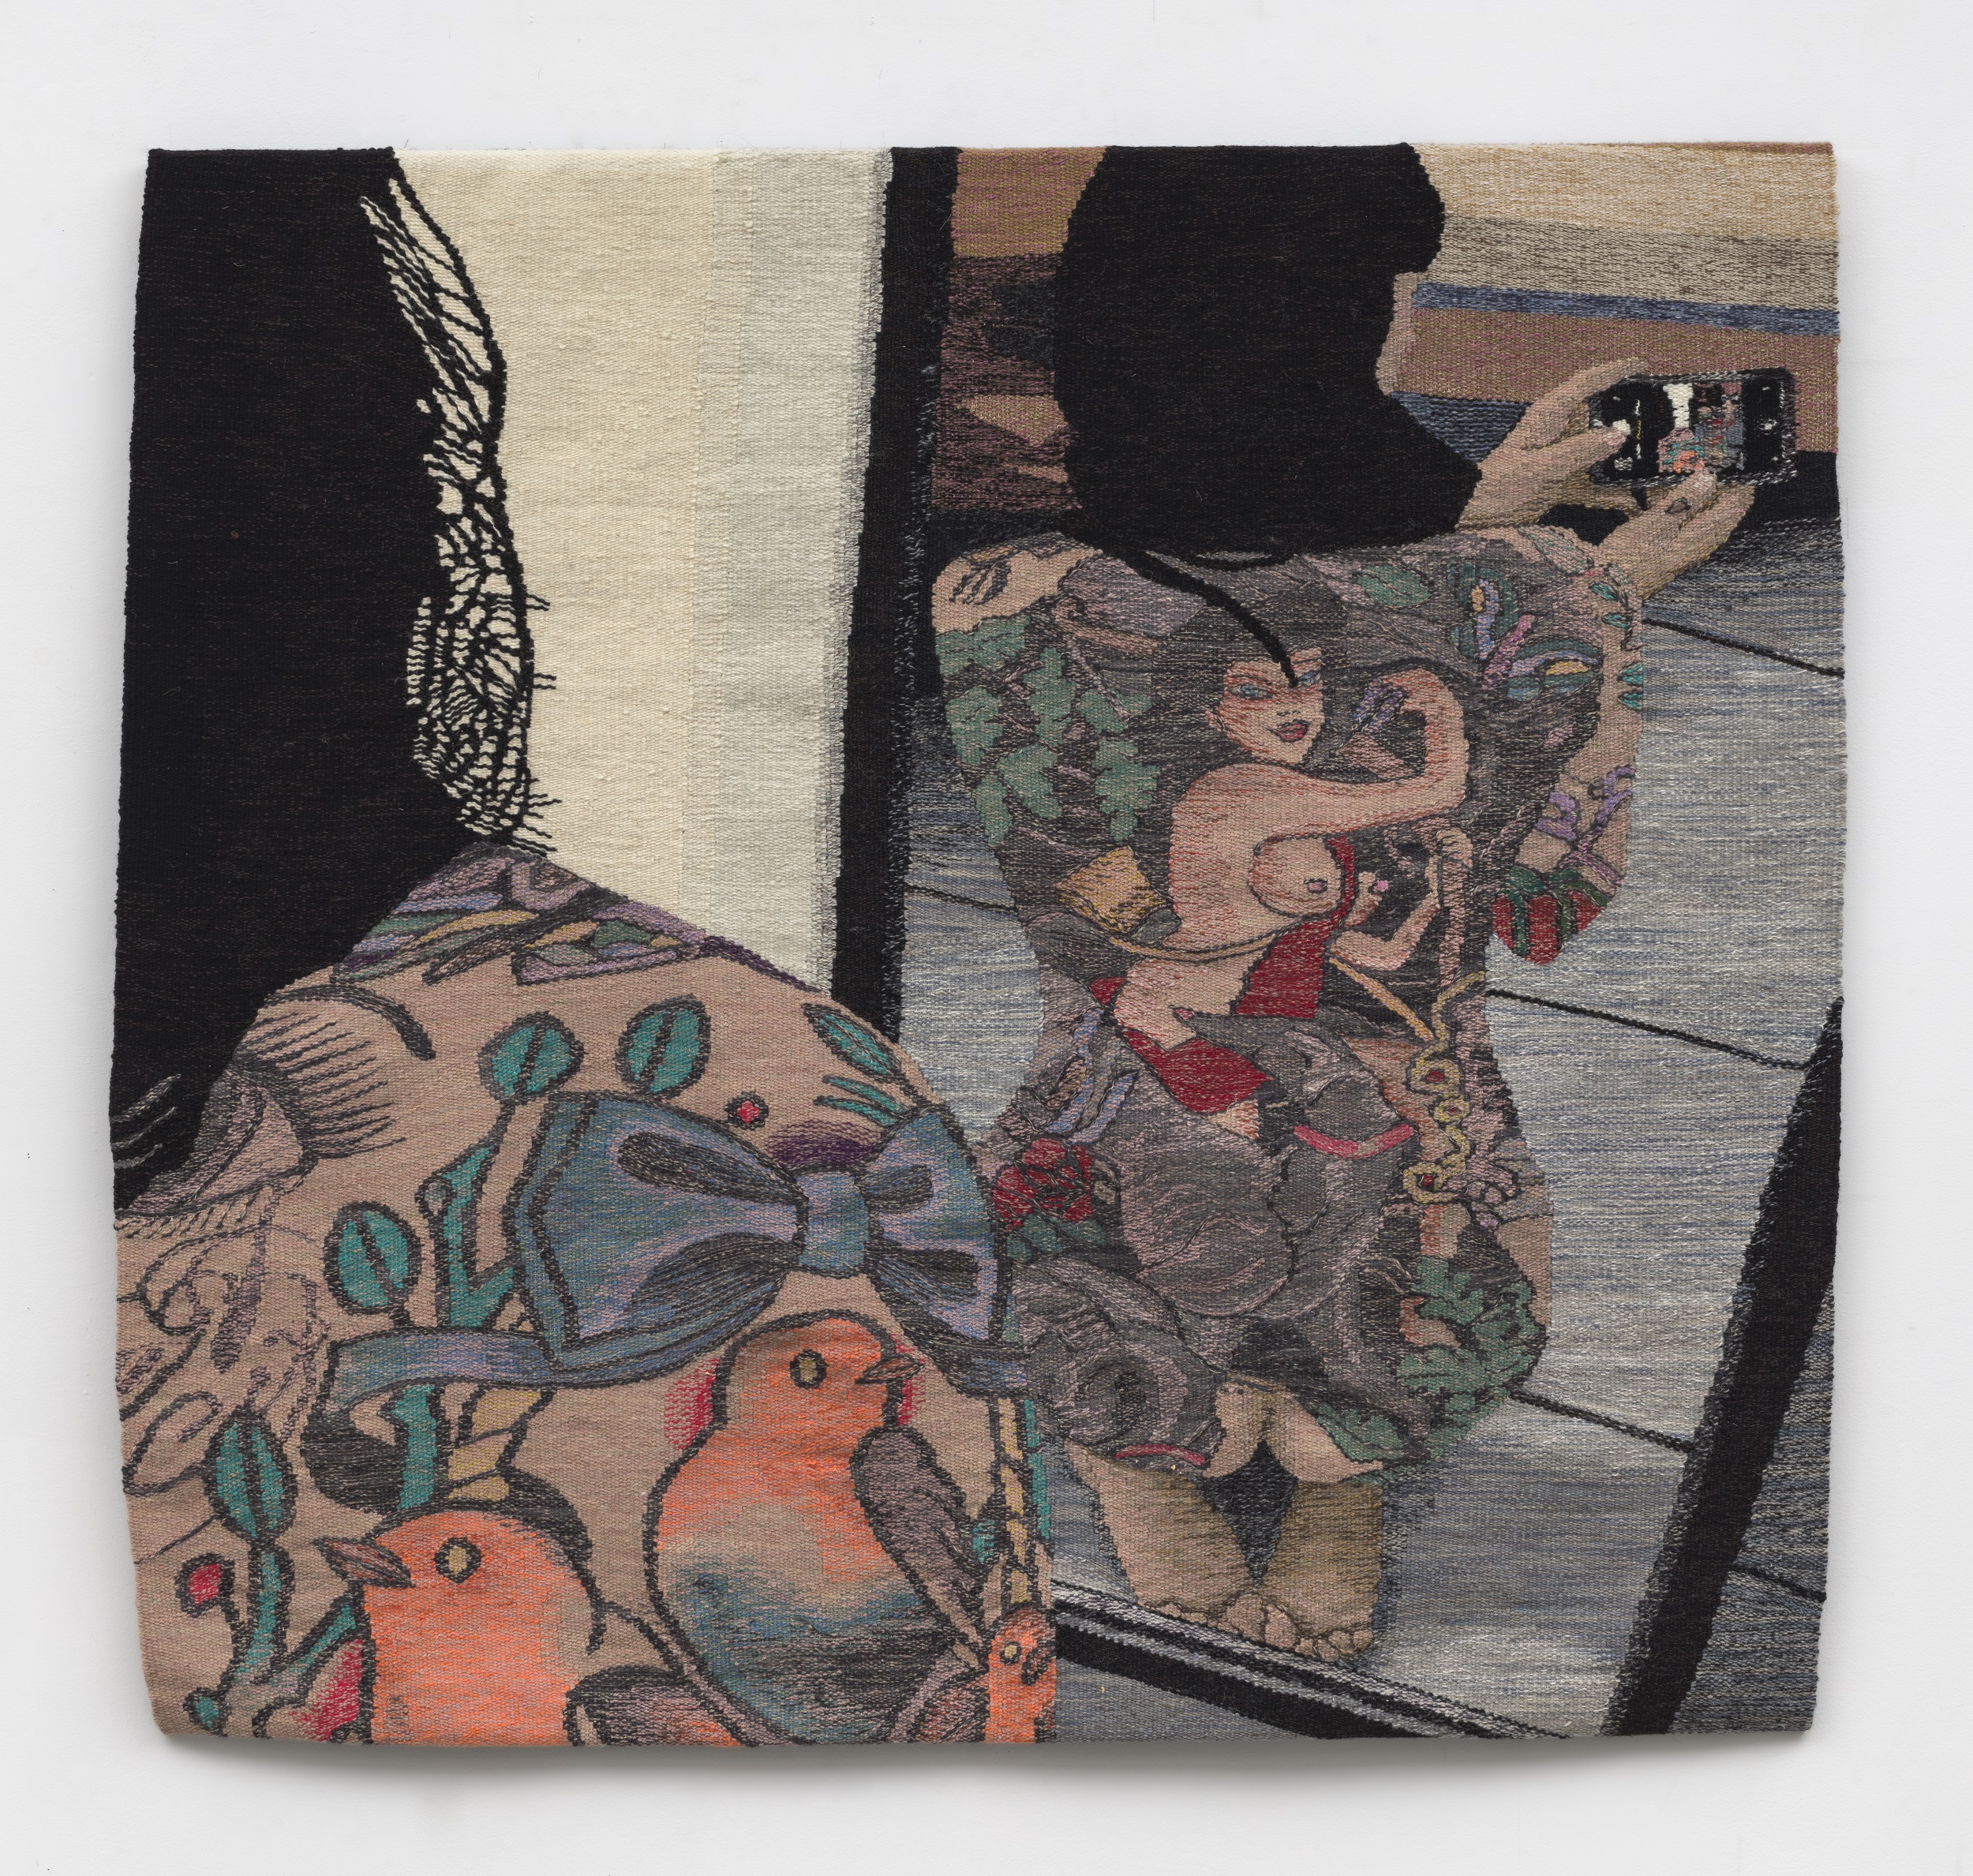 Woven tapestry of a woman with dark hair and full-body tattoos kneeling with her back to a mirror, taking a picture with a cell phone over her shoulder.